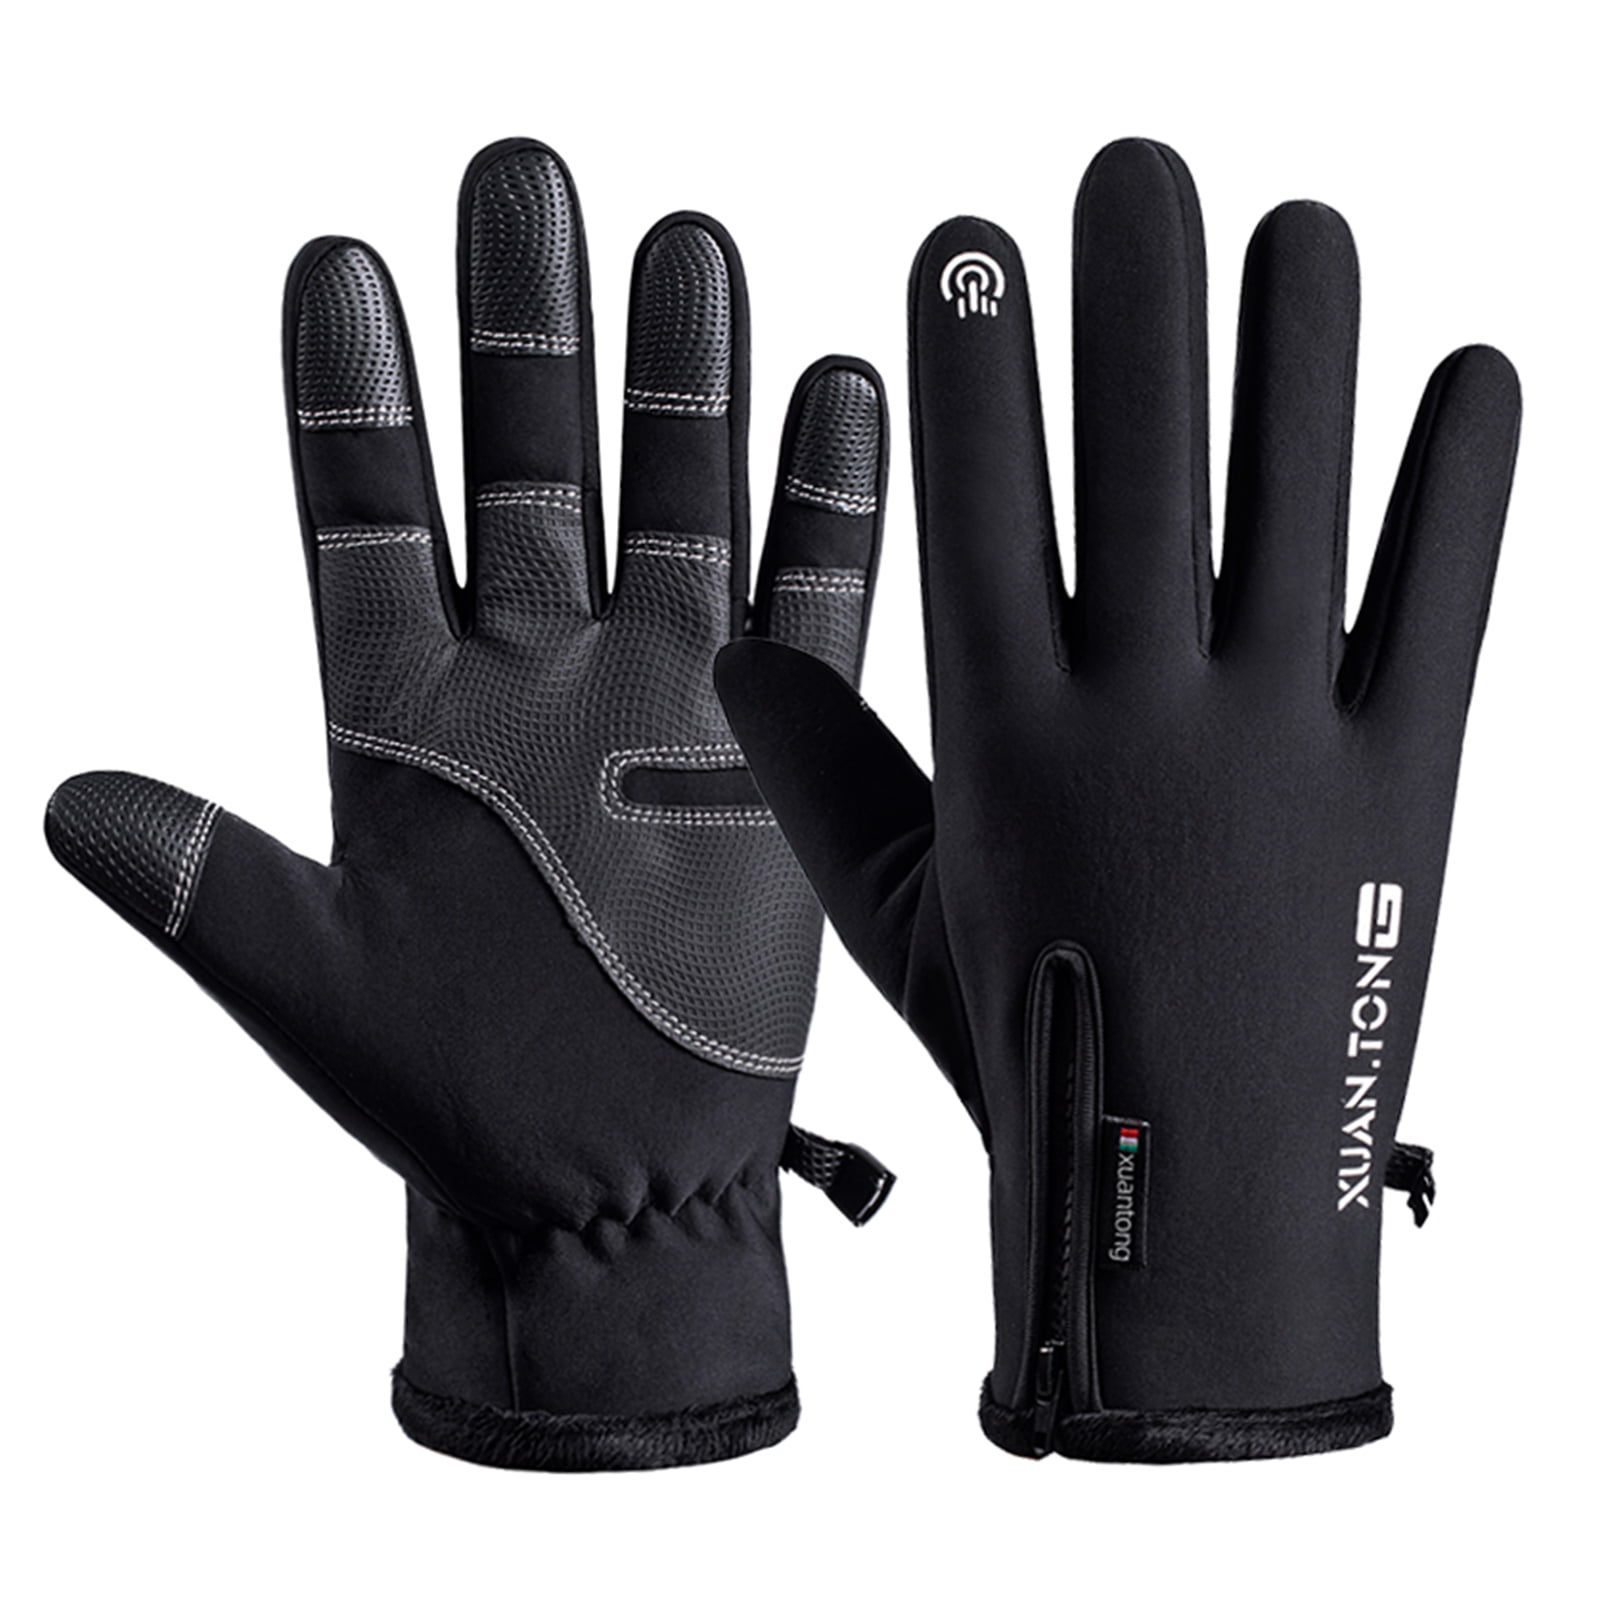 Winter Warm Gloves Thermal Windproof Ski Gloves for Cold Weather Running Cycling